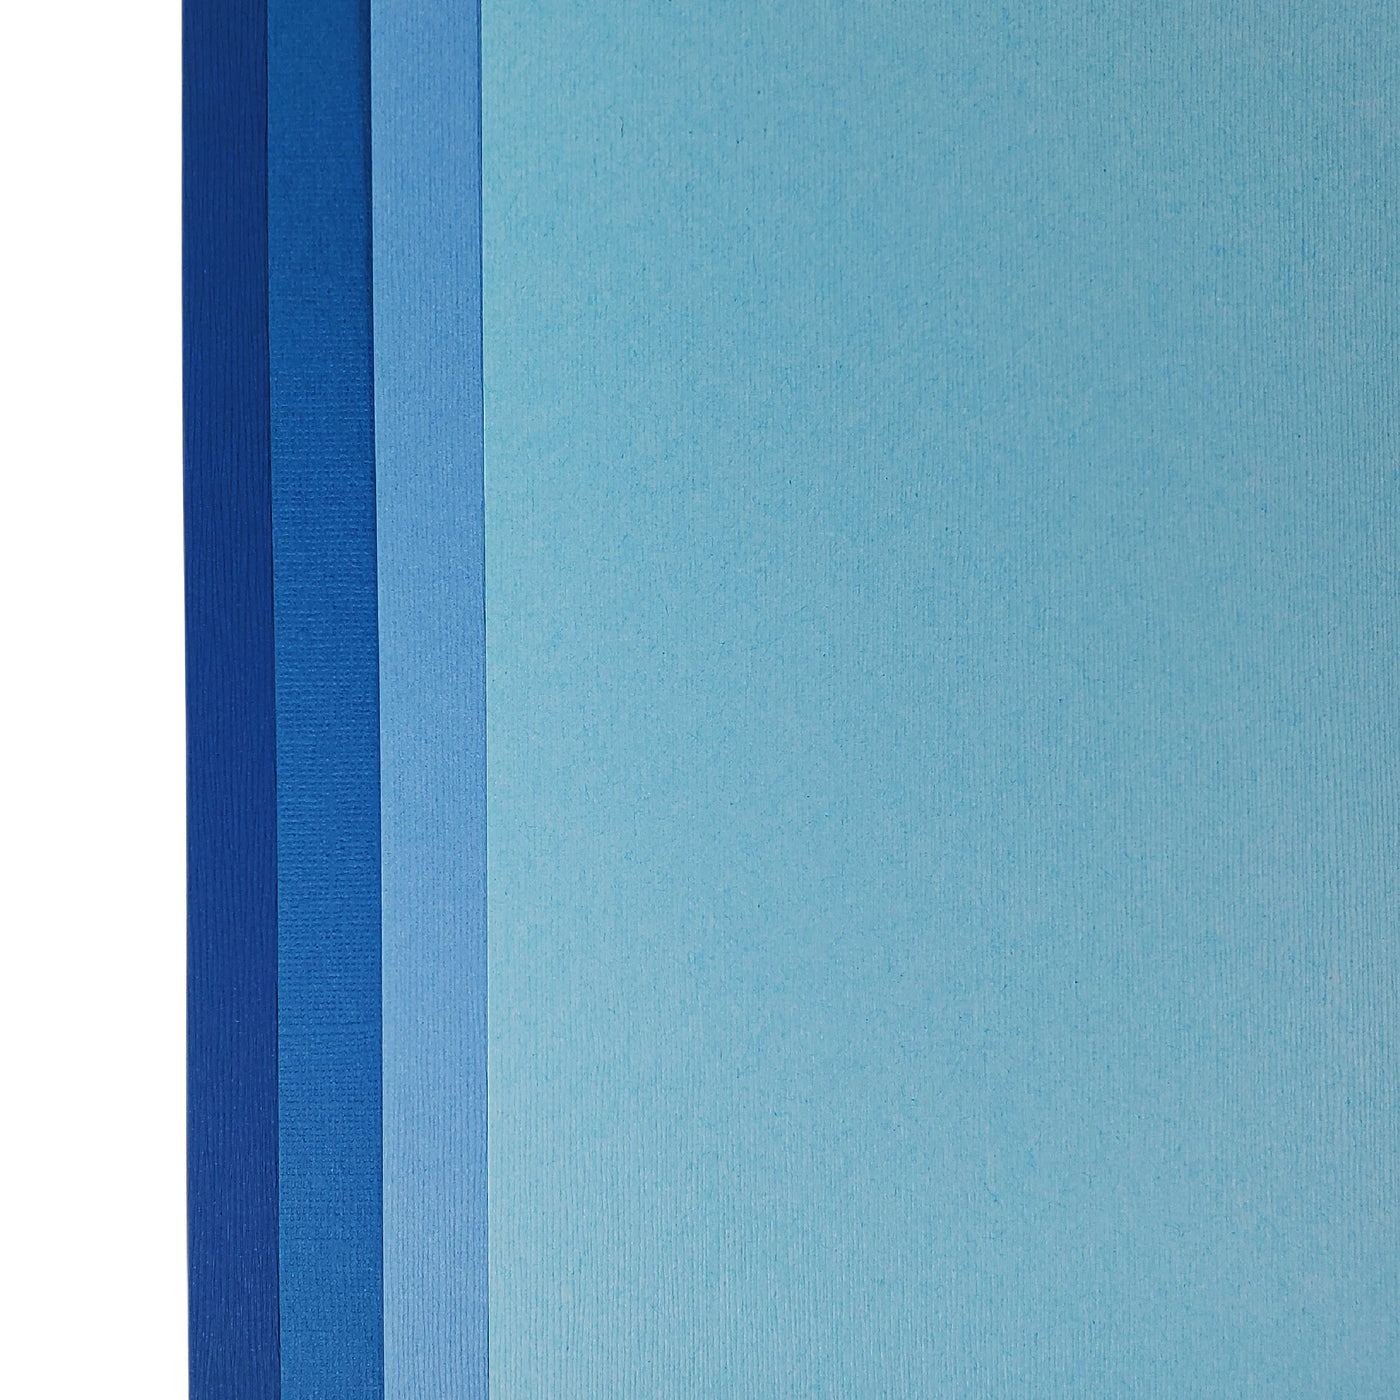 The Blue monochromatic assortment includes three (3) each of four (4) shades of blue colors of Bazzill textured cardstock.